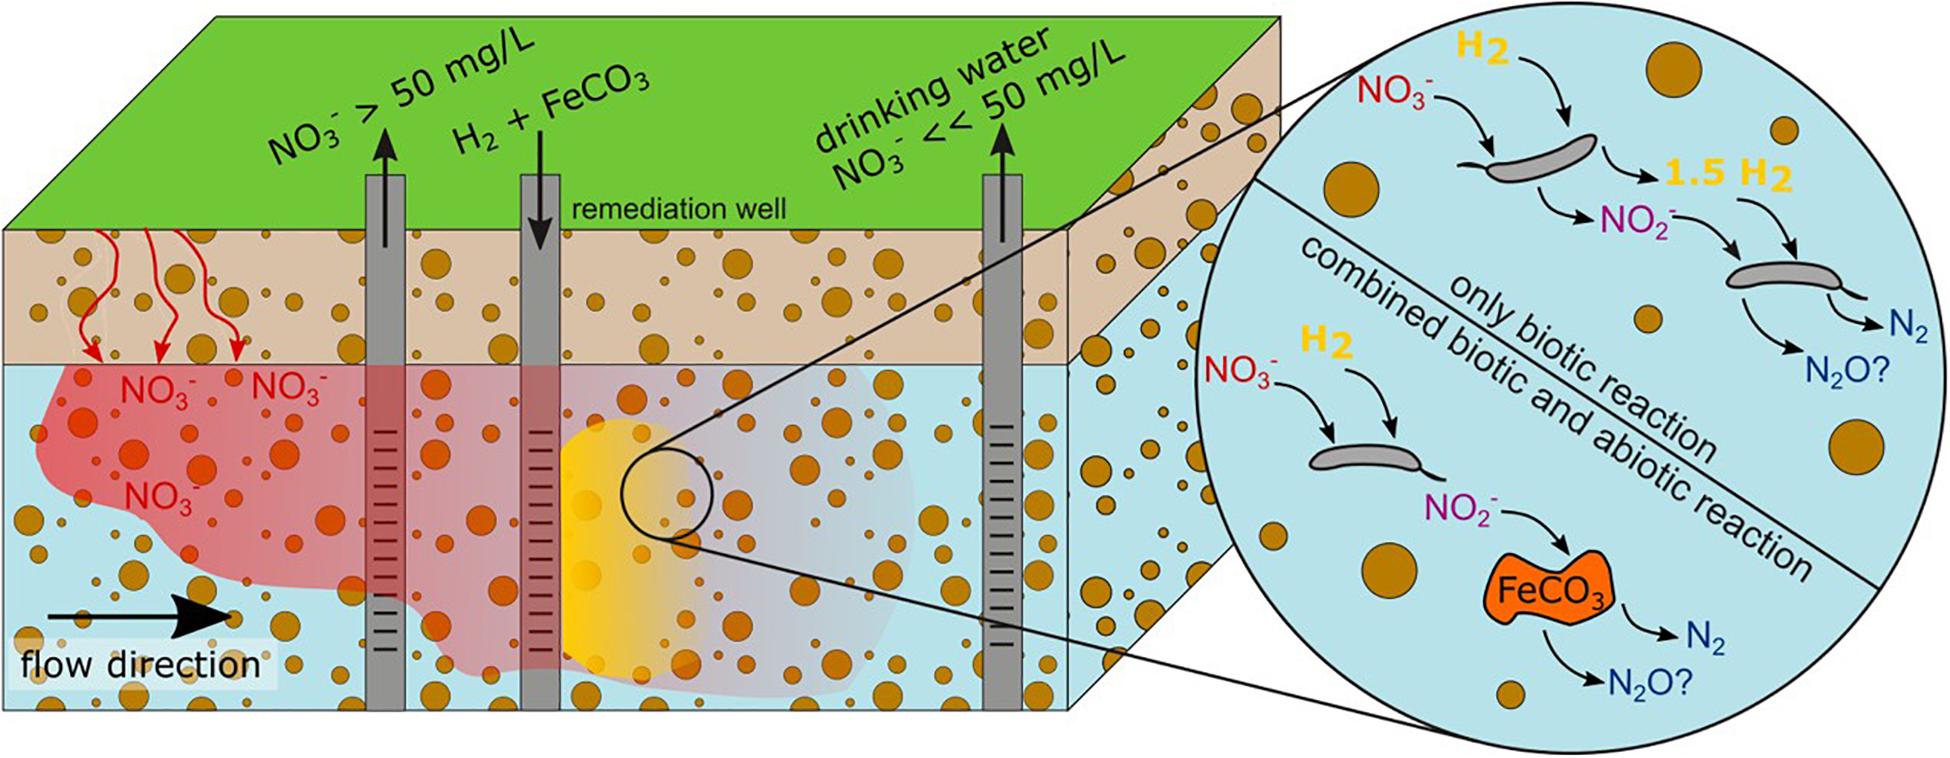 Frontiers Strategies To Overcome Intermediate Accumulation During In Situ Nitrate Remediation In Groundwater By Hydrogenotrophic Denitrification Microbiology